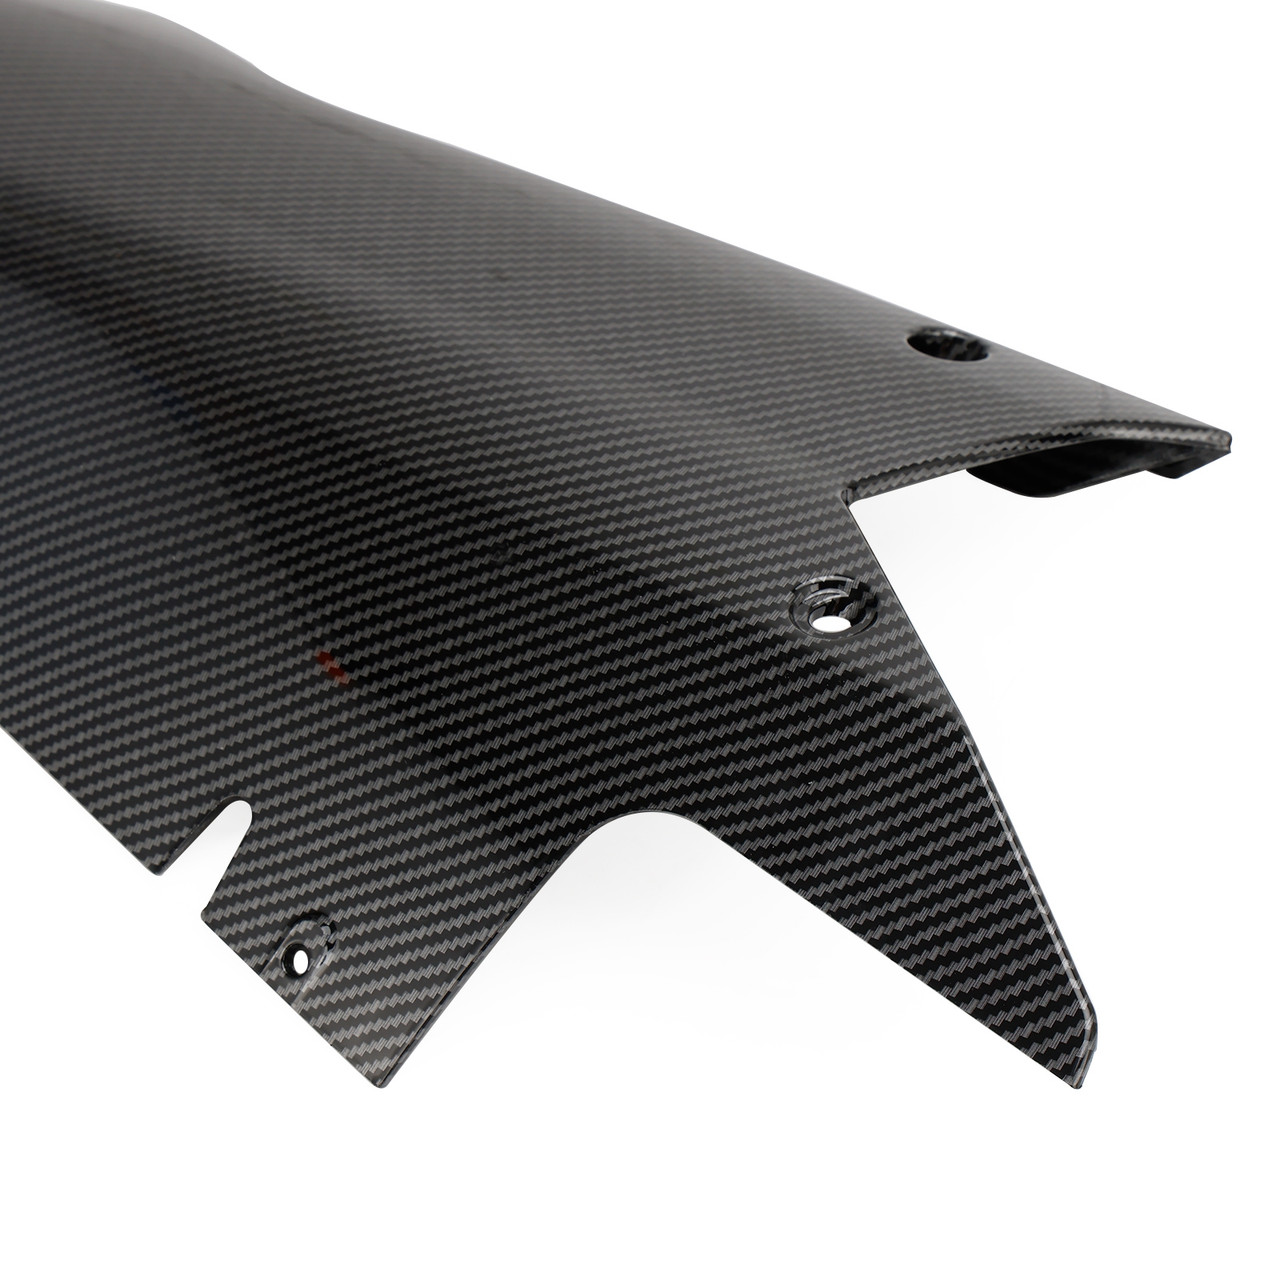 Carbon Engine Lower Belly Pan Panels Guard Fairing for Aprilia RS 660 2020-2022